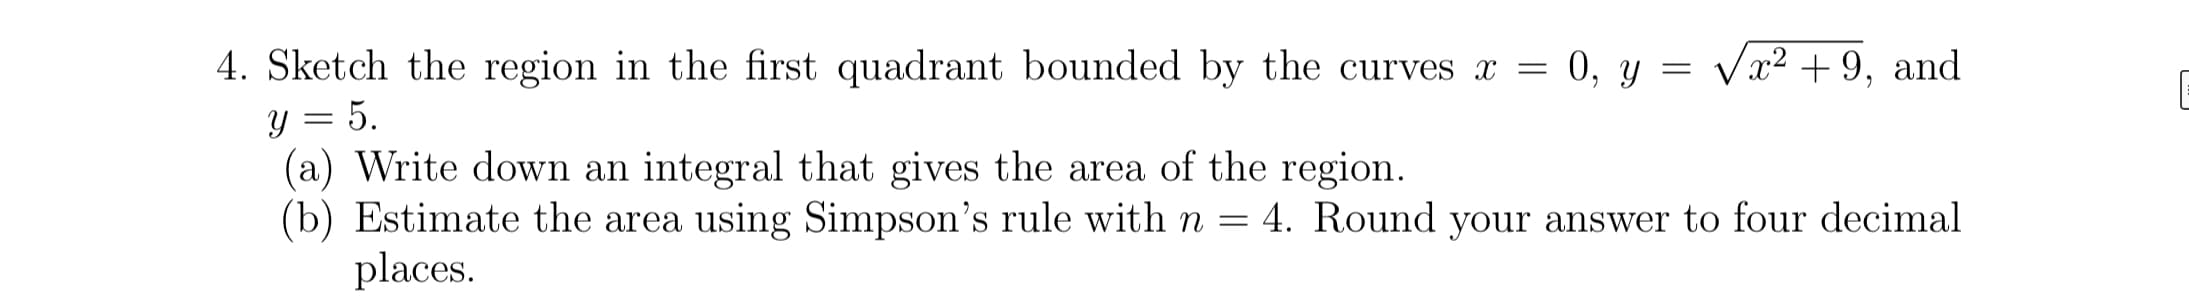 4. Sketch the region in the first quadrant bounded by the curves x = 0, y = Va? + 9,
and
y = 5.
(a) Write down an integral that gives the area of the region.
(b) Estimate the area using Simpson's rule with n
4. Round your answer to four decimal
places.
